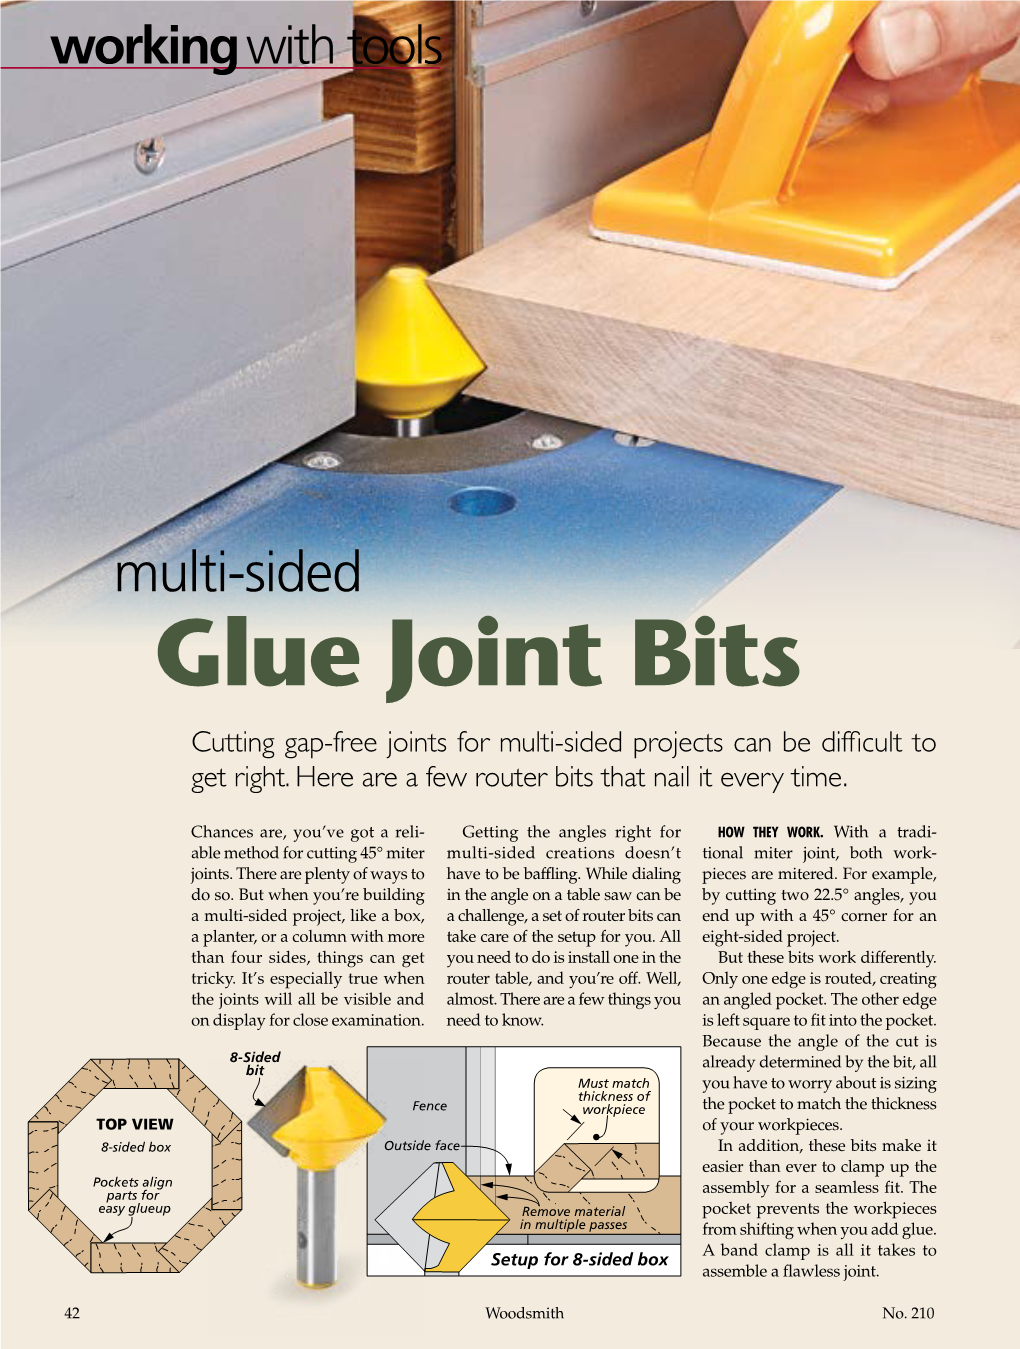 Multi-Sided Glue Joint Bits Cutting Gap-Free Joints for Multi-Sided Projects Can Be Difficult to Get Right